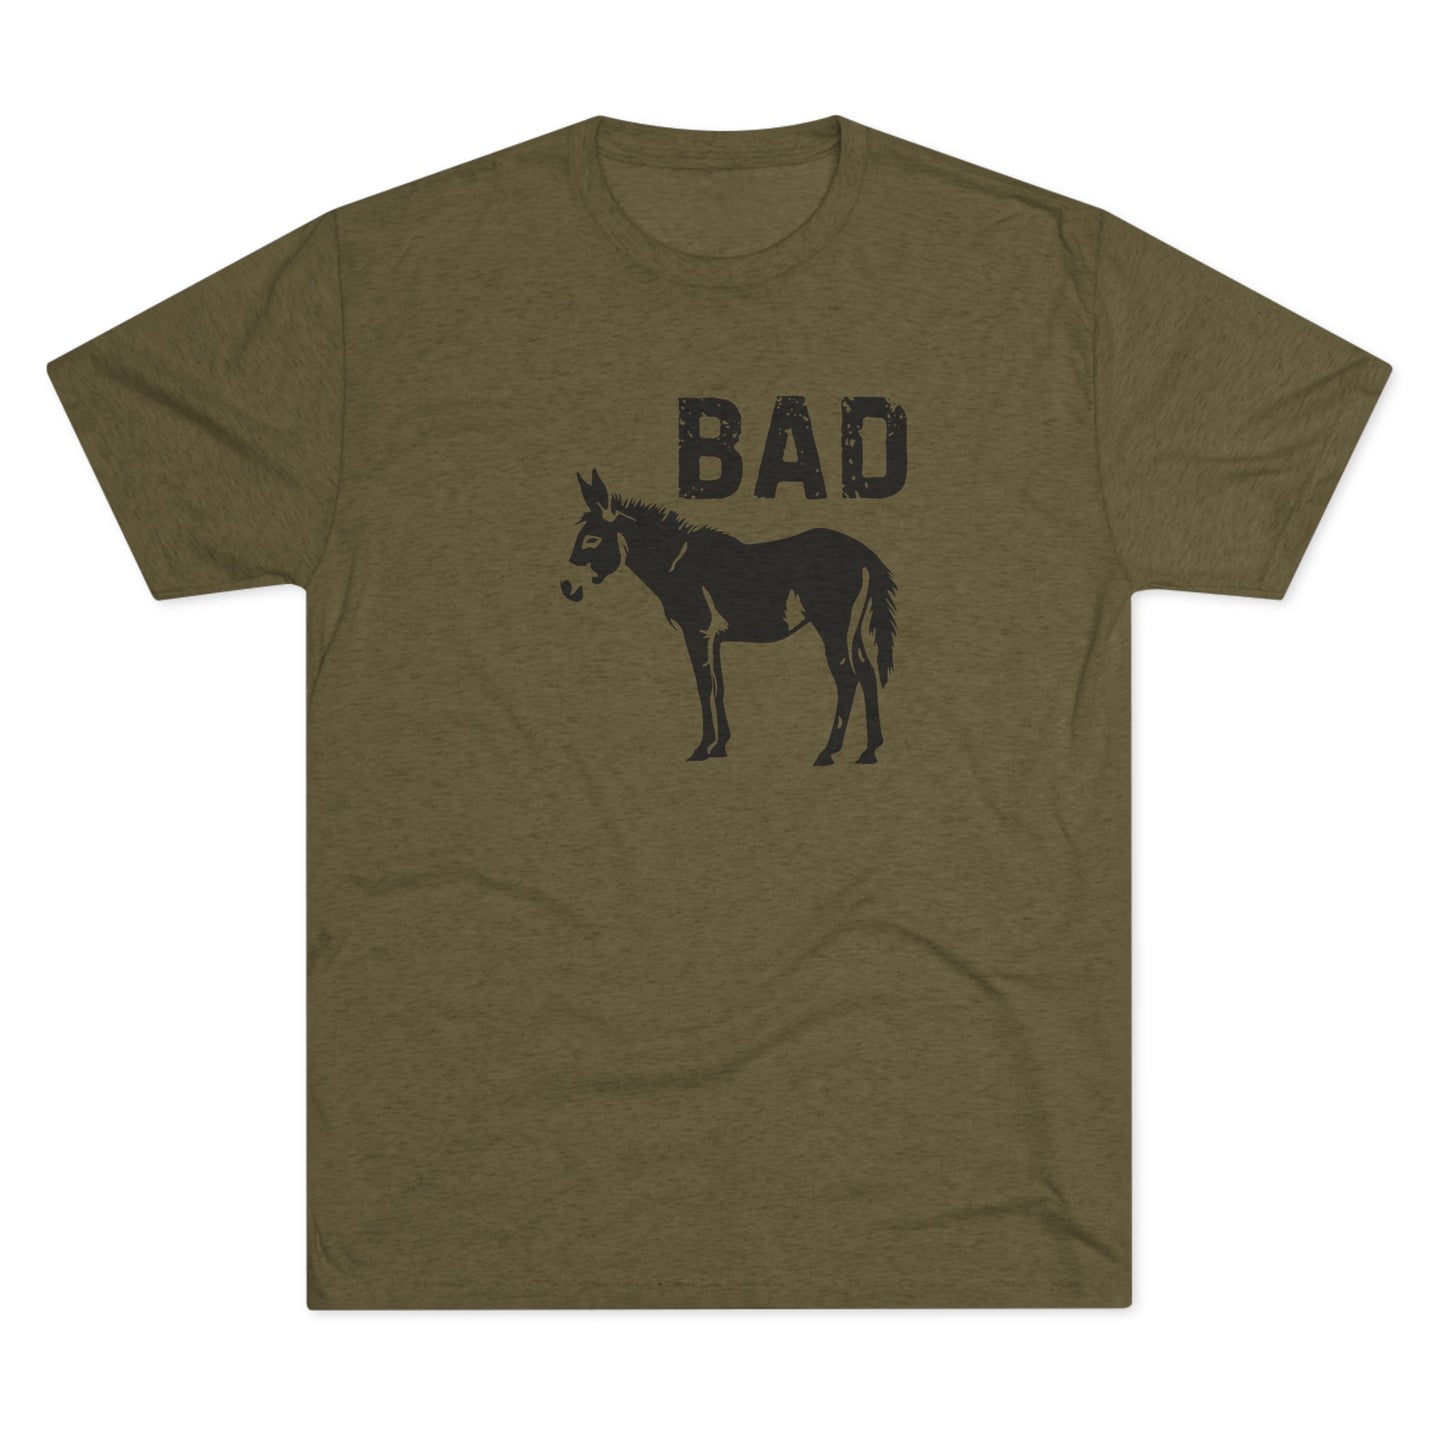 Bad Ass T-Shirt - Ultra-Soft Tri-Blend, Regular Fit for Effortless Comfort and Style